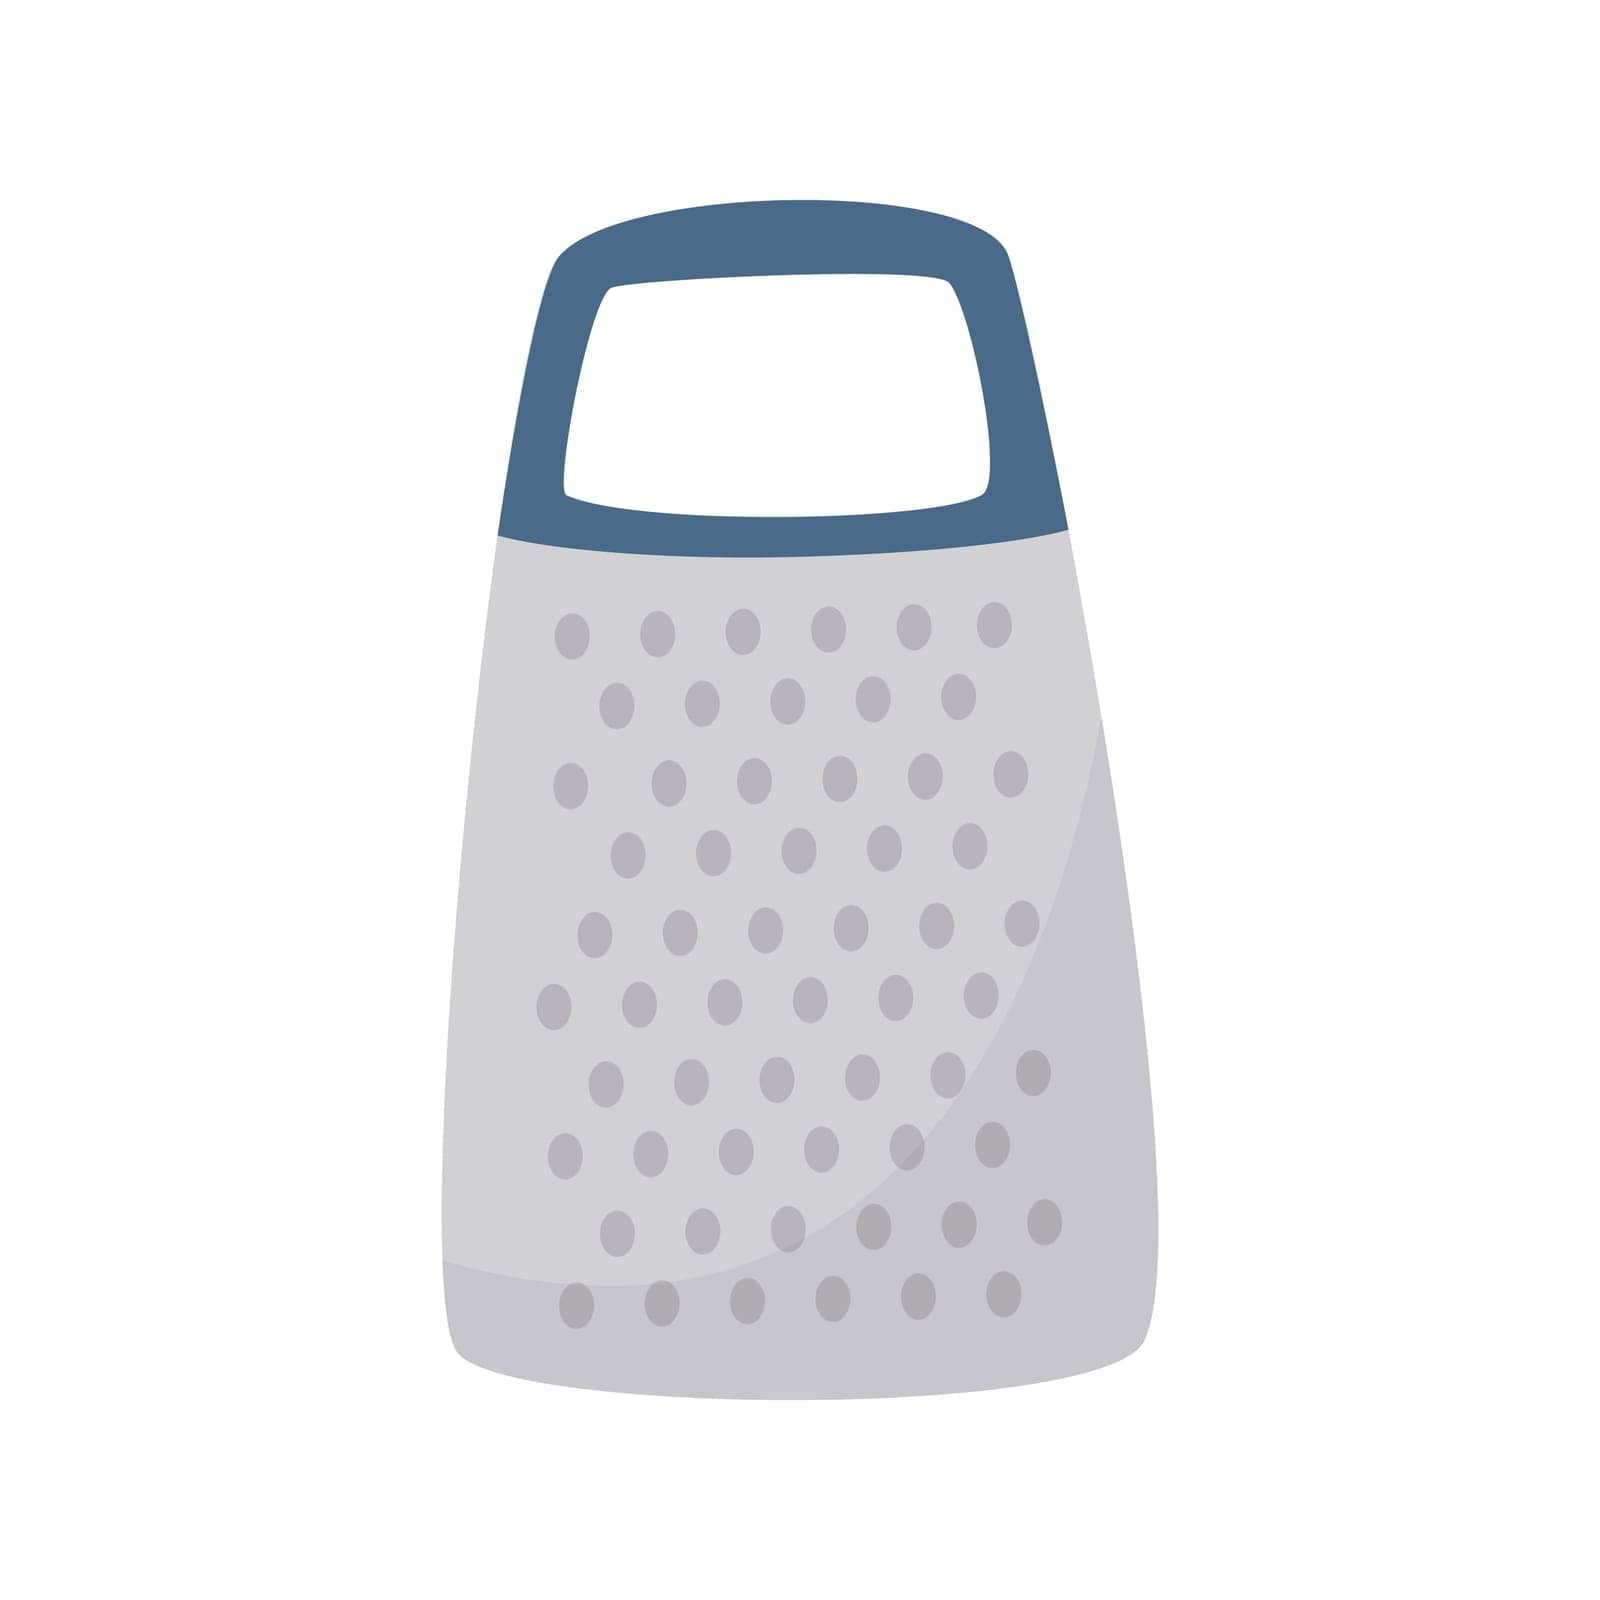 Kitchen steel grater for grating cheese, vegetables and other foods clip art, flat style by TassiaK